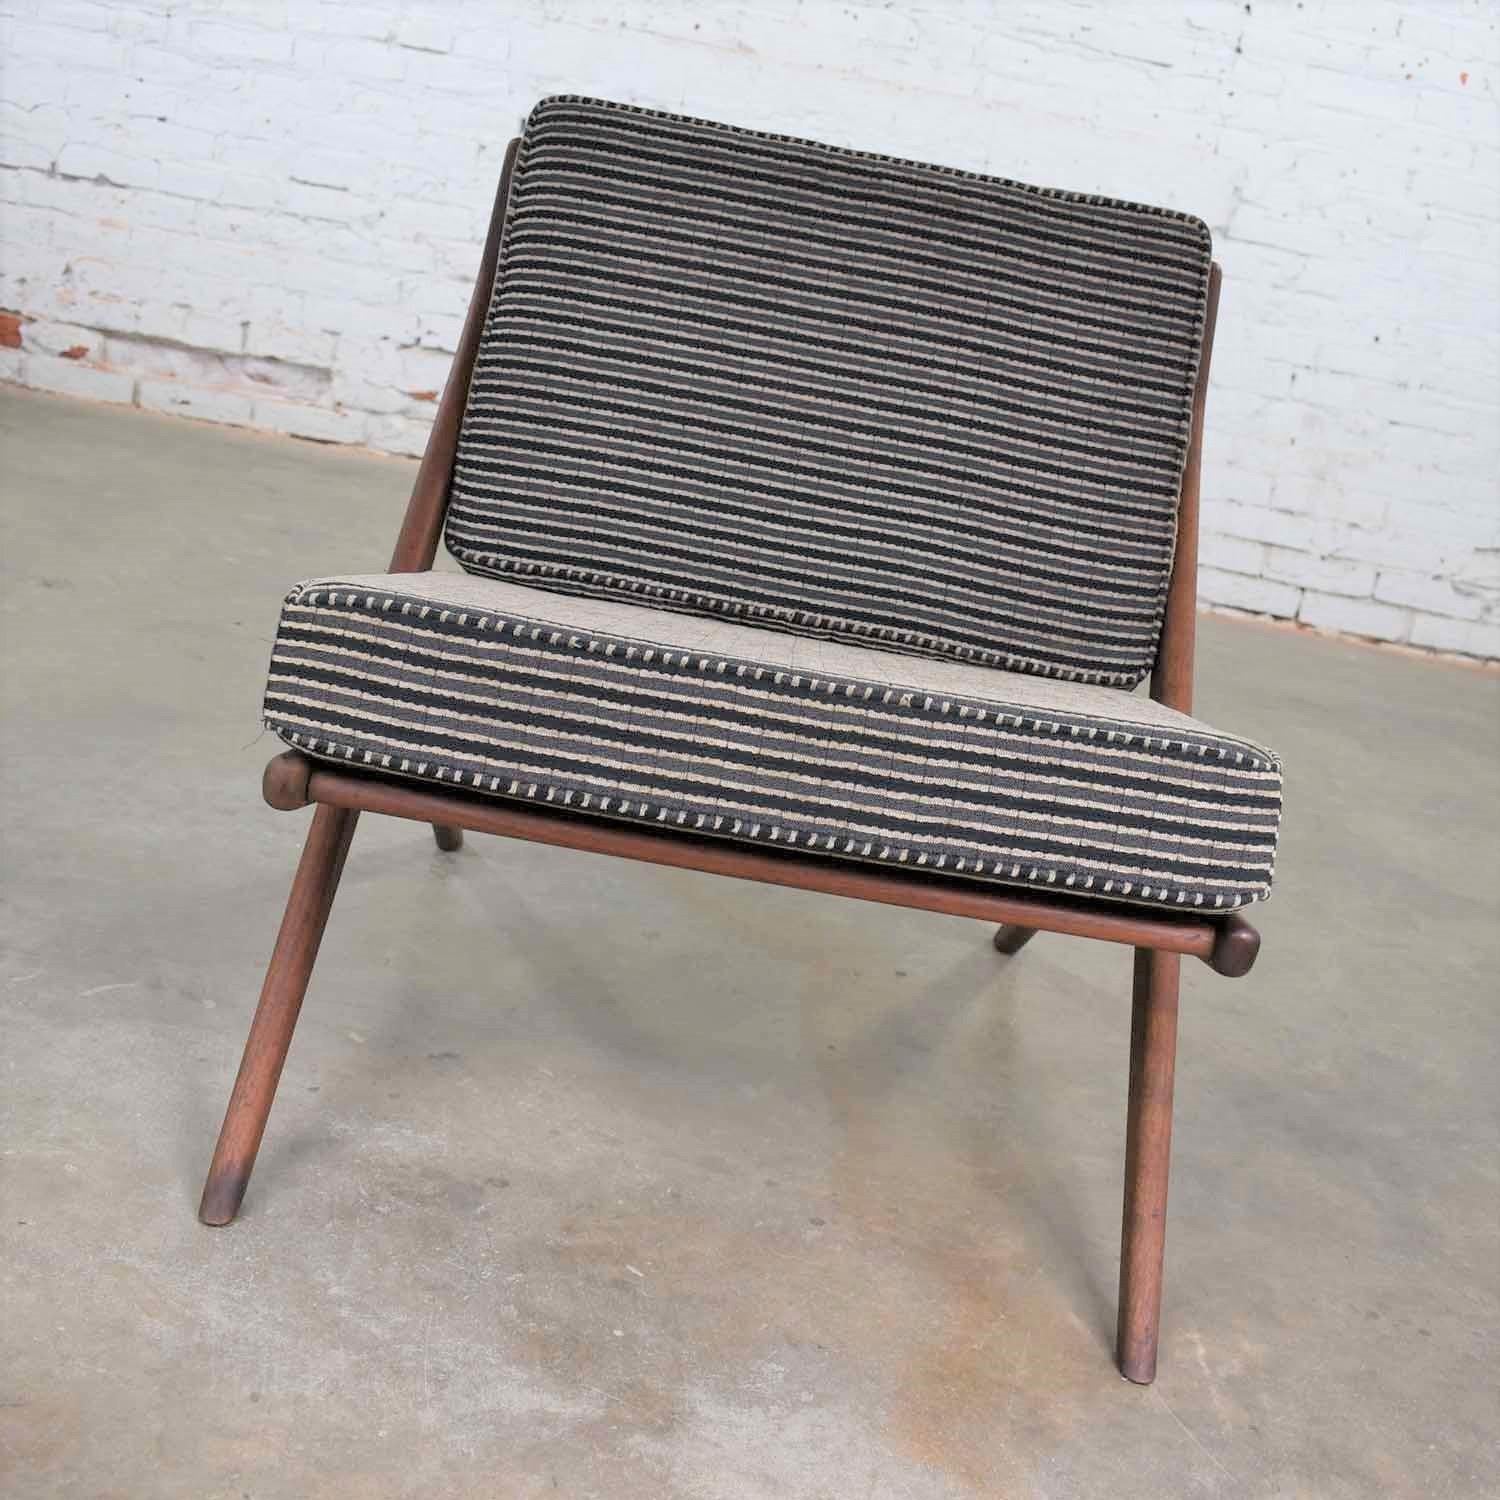 Scandinavian Modern Scissor Lounge Chair by Folke Ohlsson for DUX In Good Condition For Sale In Topeka, KS